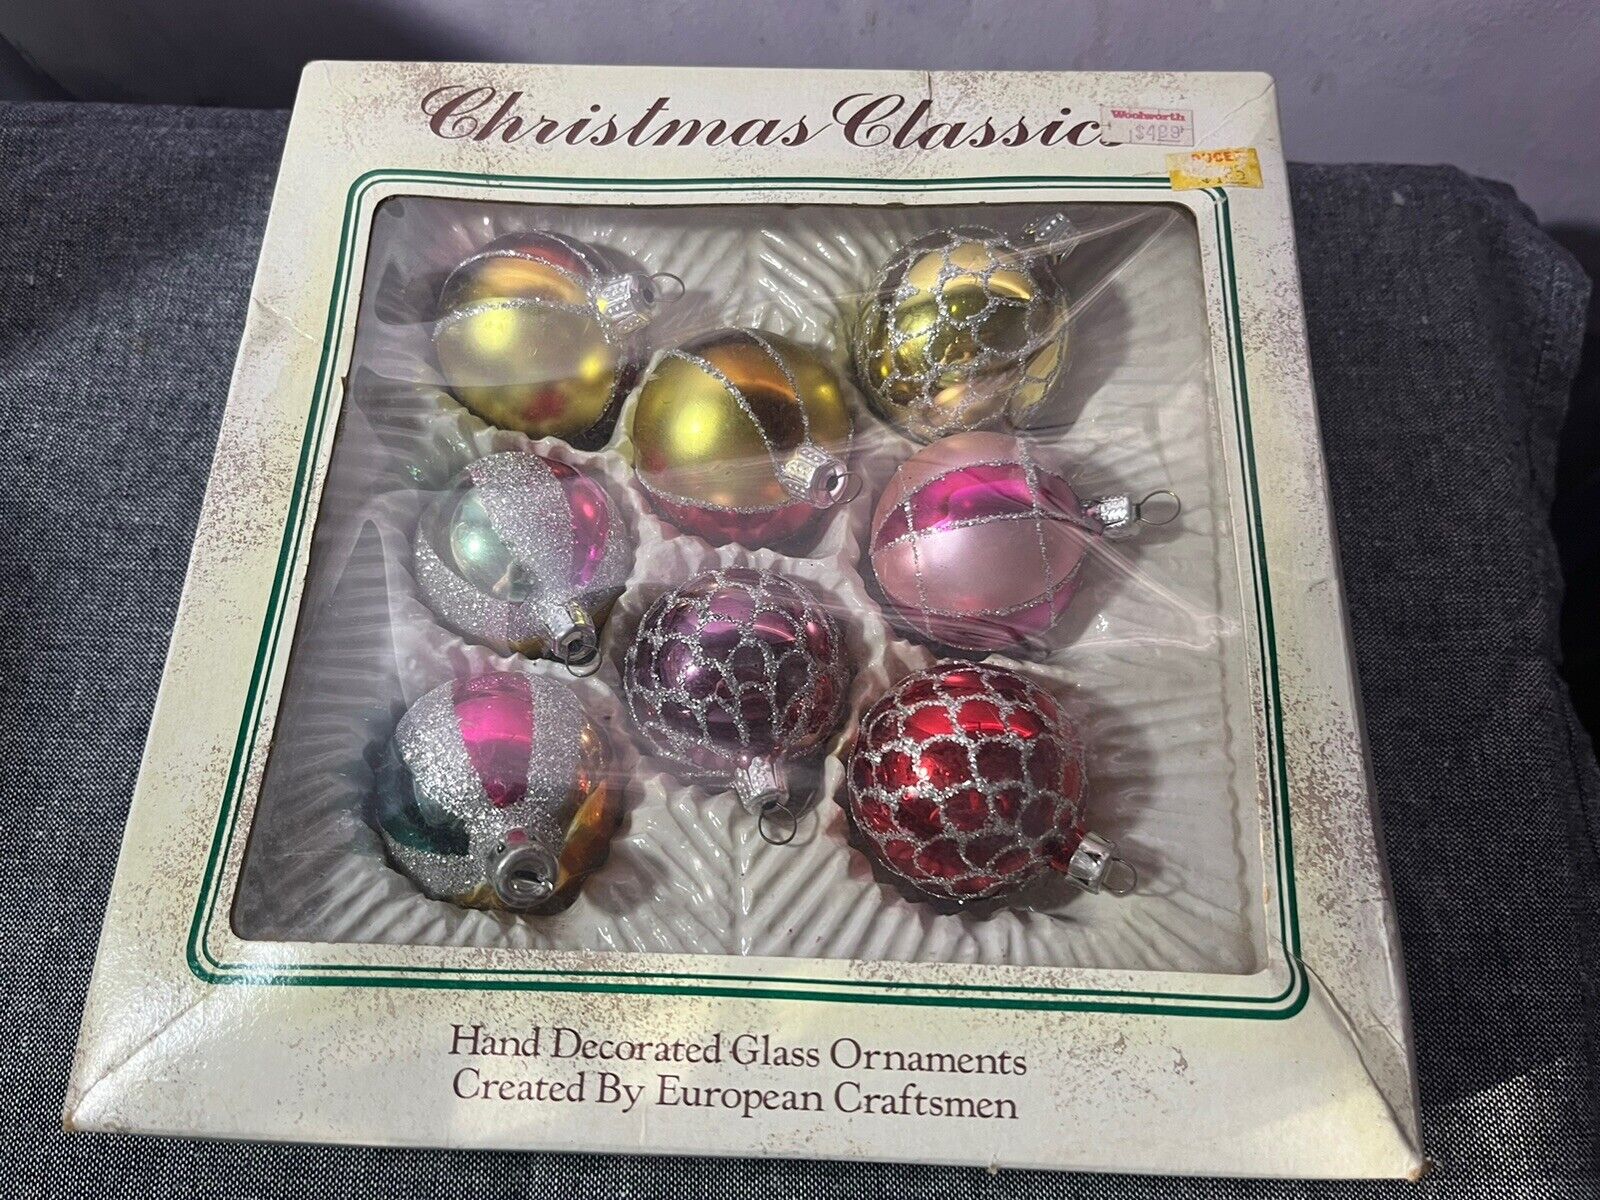 14 Vintage Christmas Classics Glass Ornaments Made In Romania In Original Boxes